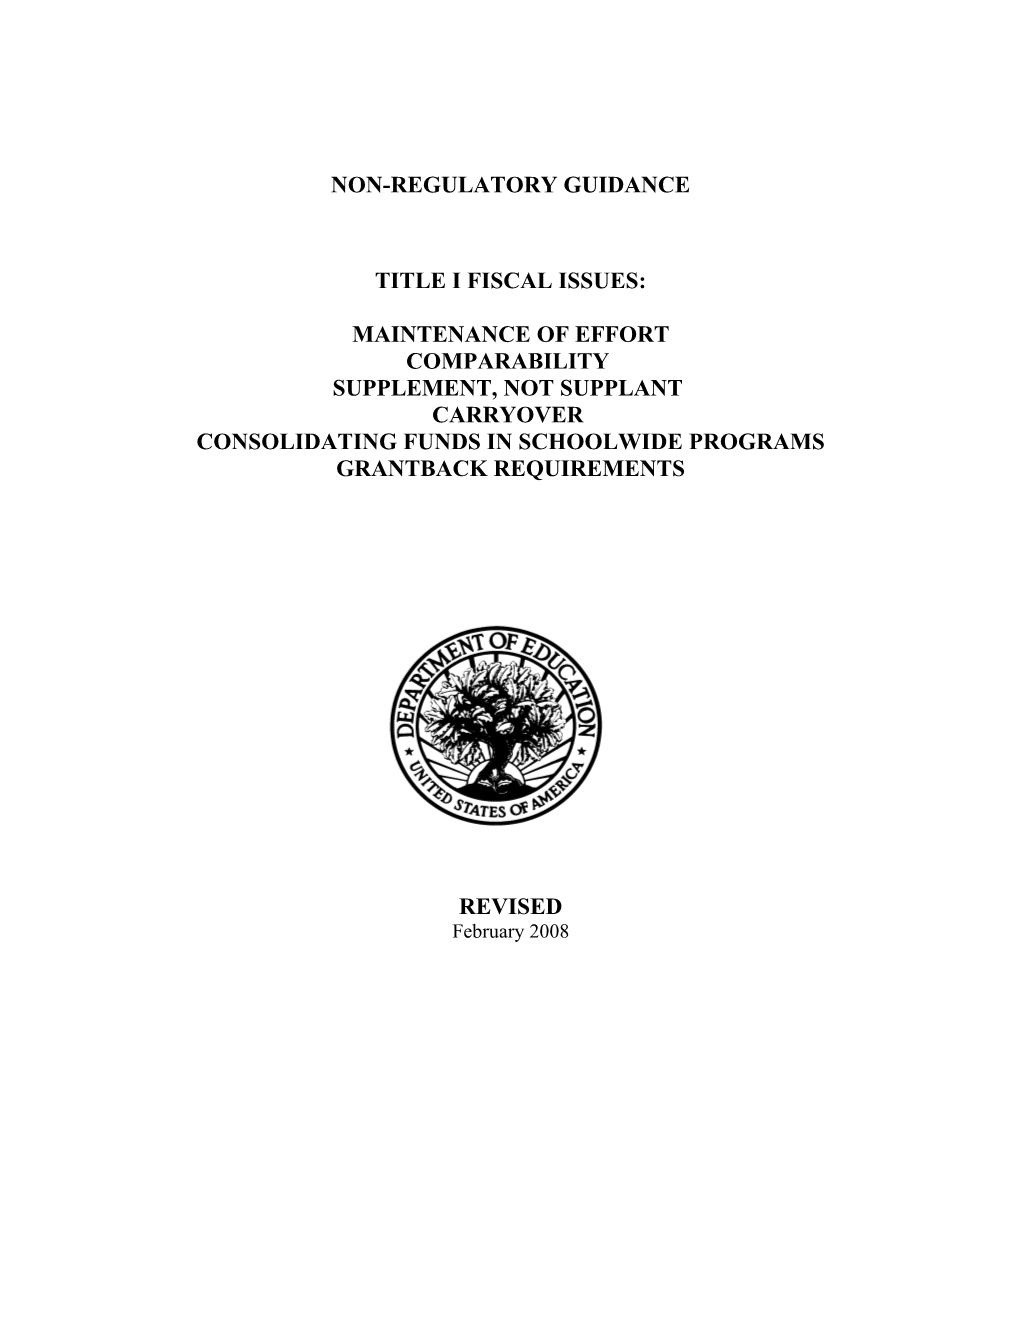 February 2008 Revised Non-Regulatory Guidance Title I Fiscal Issues: Maintenance of Effort